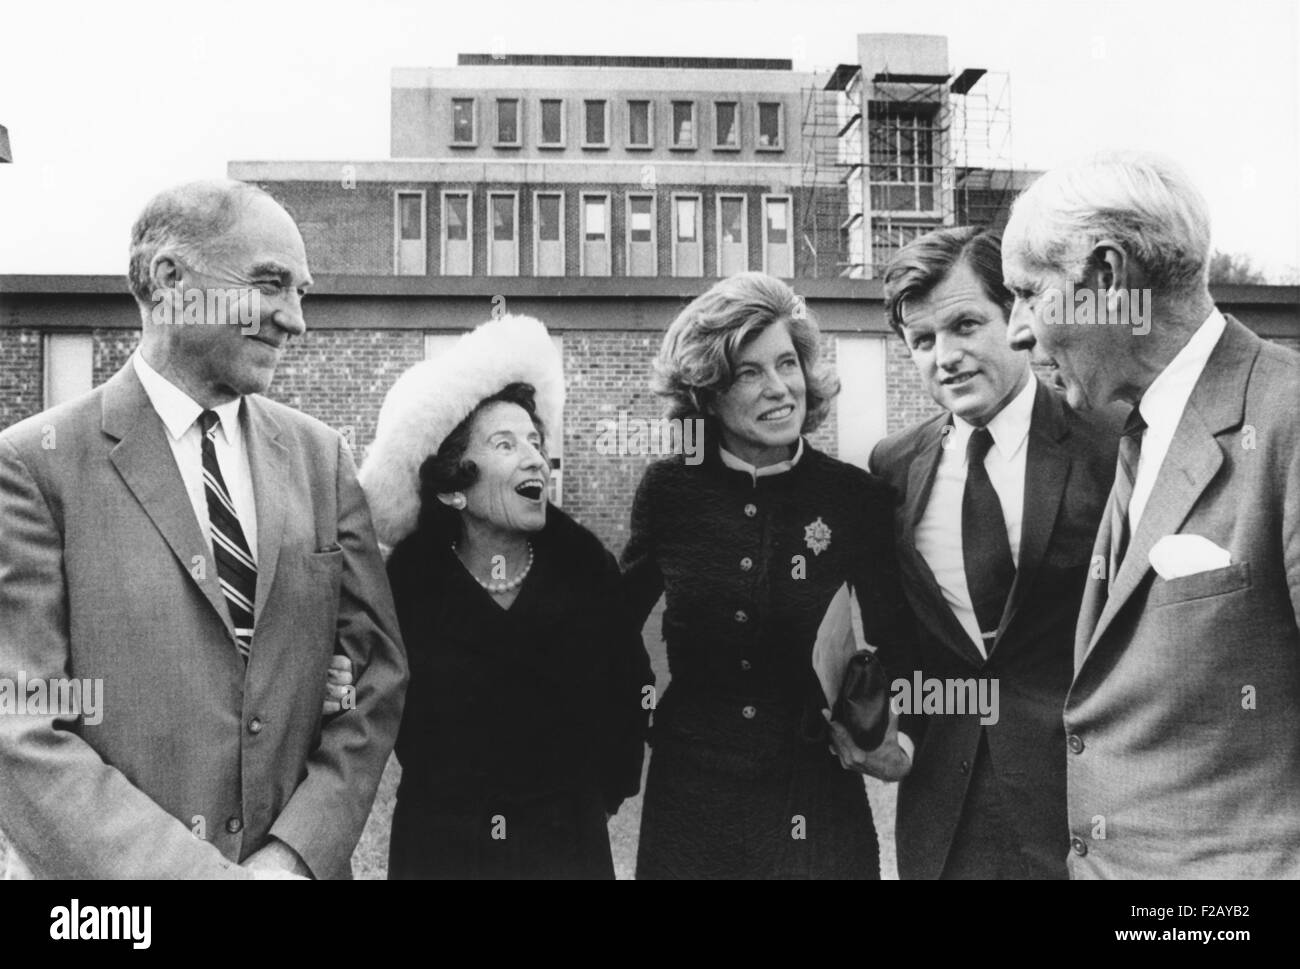 Kennedy family at Waltham Massachusetts for dedication of the Eunice Kennedy Shriver Institute. Oct. 14, 1970. The Institute conducted research and clinical evaluation of the intellectually disabled. L-R: Dr. Raymond D. Adams, Dir. Of the Center; Rose Kennedy; Eunice Kennedy Shriver; Sen. Edward Kennedy; and David G. Crockett, Associate Dir. Of Massachusetts General Hospital. (CSU 2015 9 801) Stock Photo